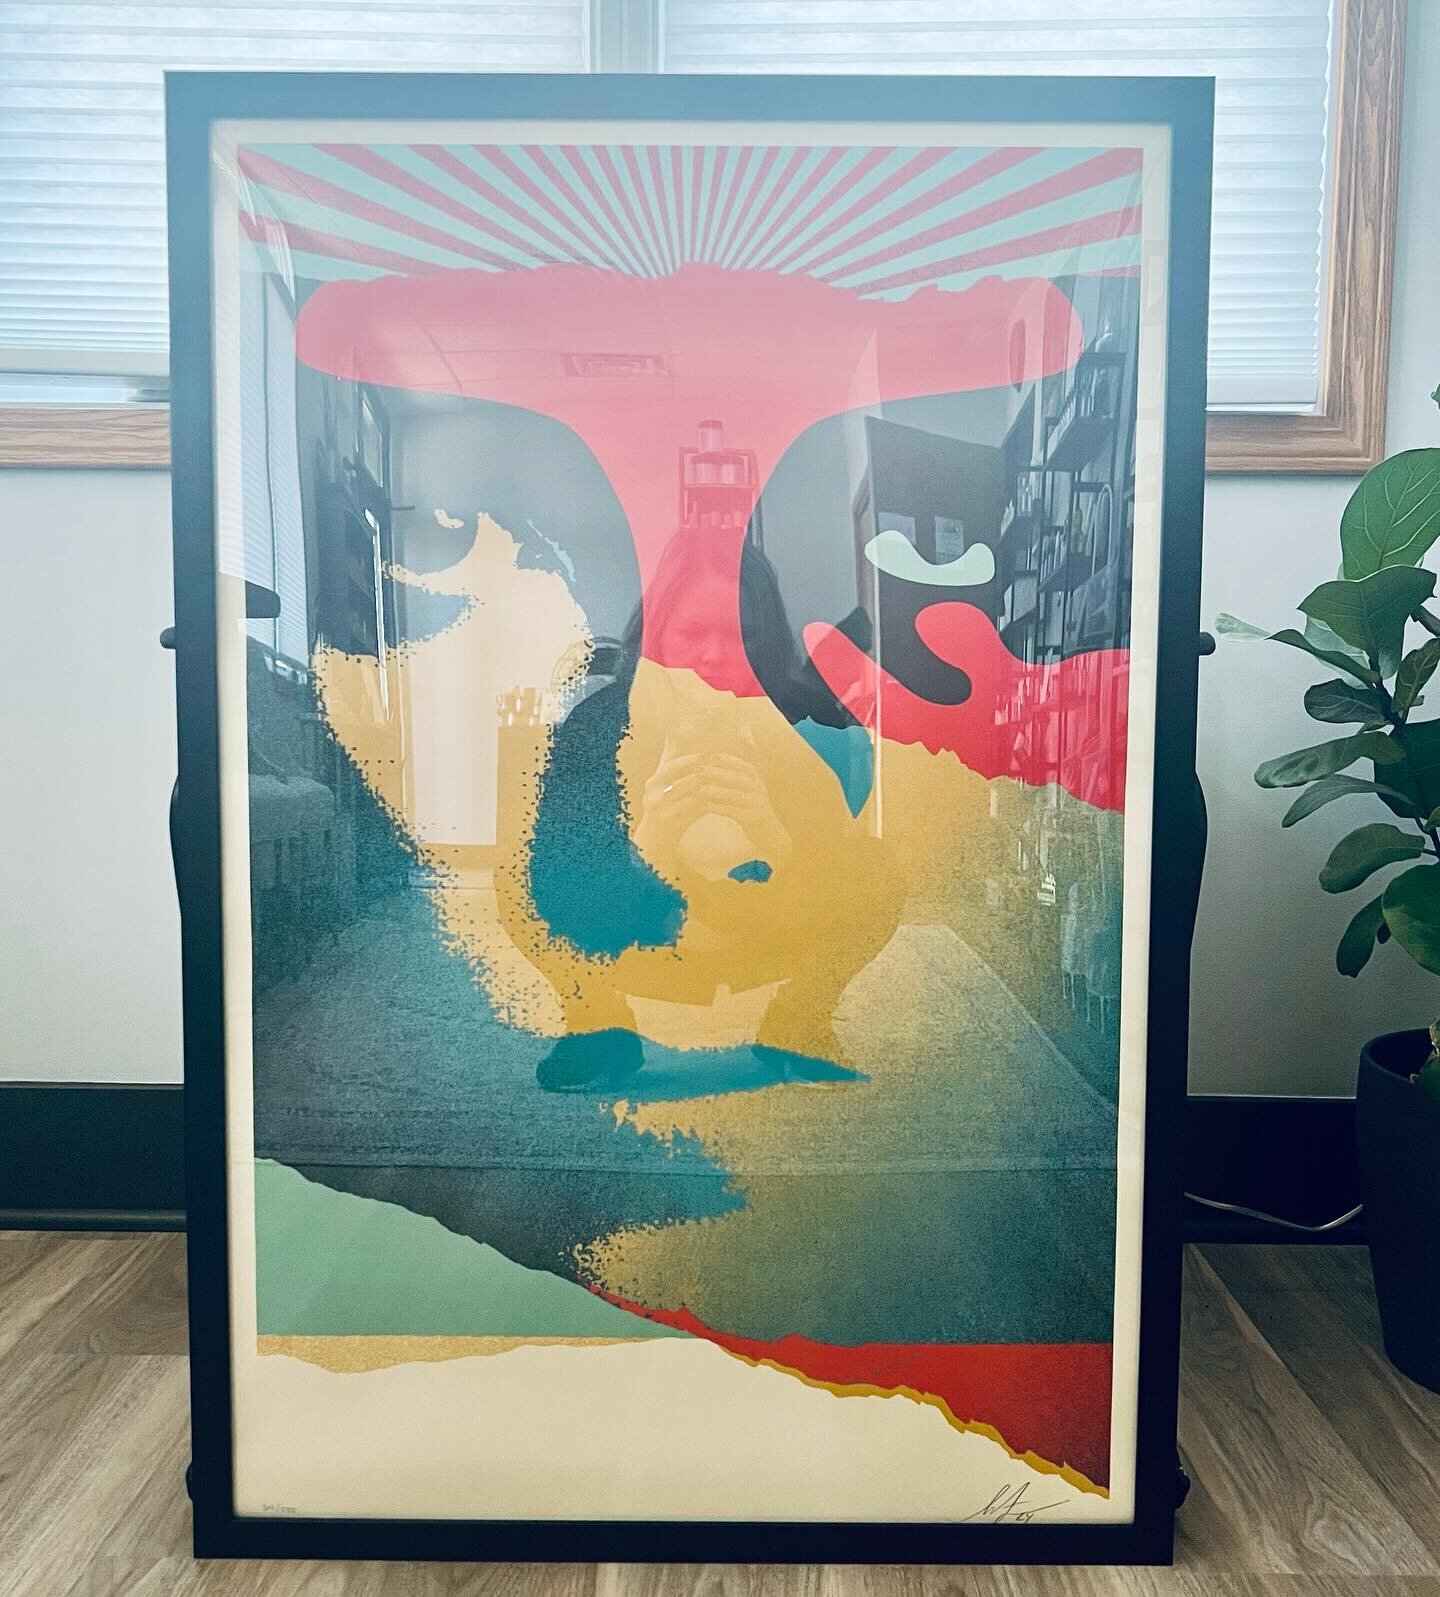 Welcome to the gallery, Mr. Bowie. 😍

Shepard Fairey &quot;A Cracked Icon&quot; 2024. 
Read the story behind this beauty @obeygiant 

The clinic gallery has several Shepard Fairey pieces, but this is my absolute favorite. 

#supportartists #streetar